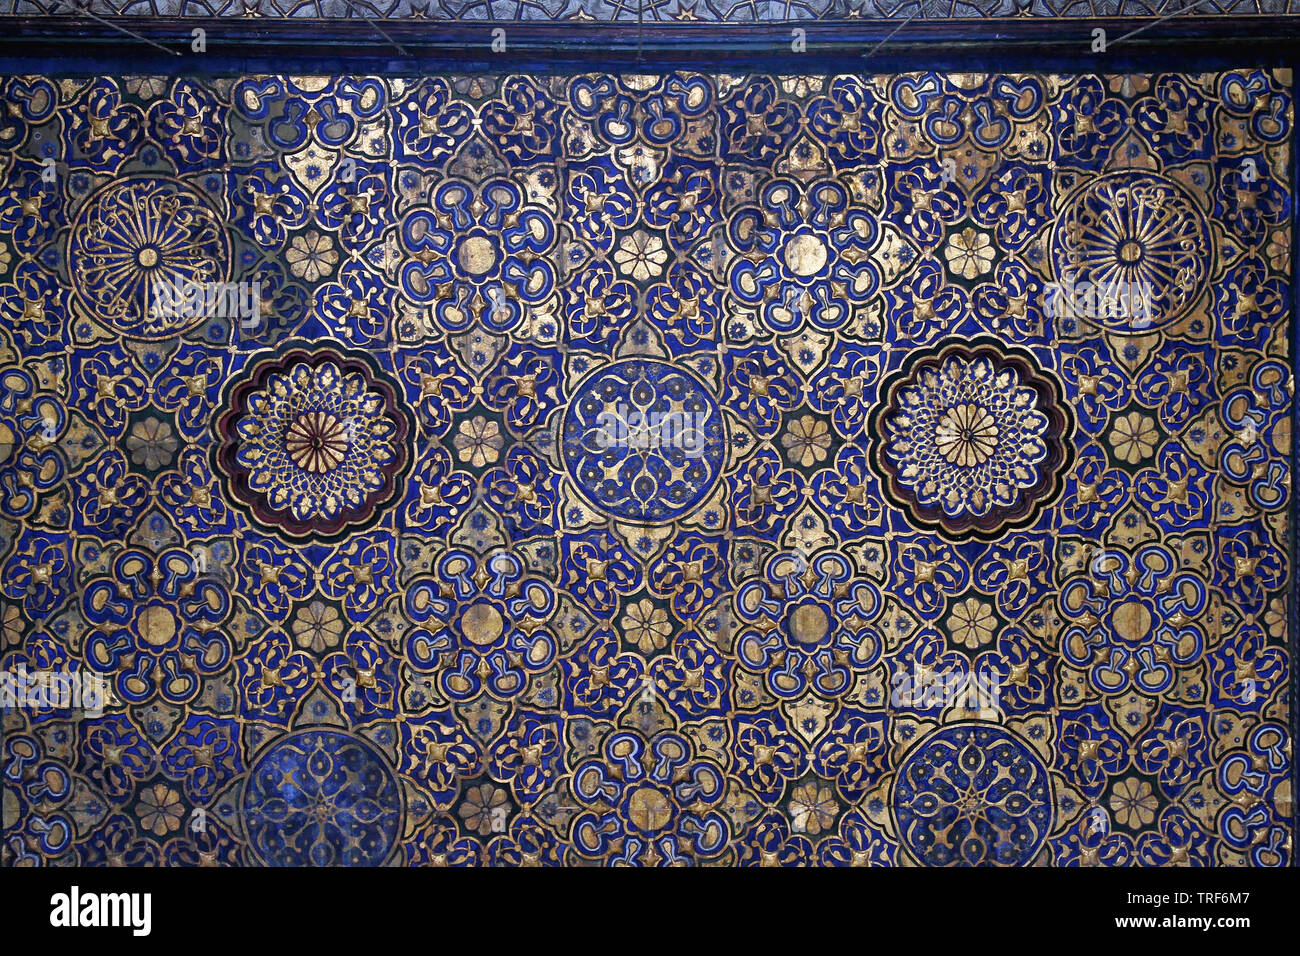 Cairo, Egypt - March 01, 2010: Luxurious Gold and Blue Mosque Ceiling at Qalawun Complex in Cairo, Egypt. Stock Photo